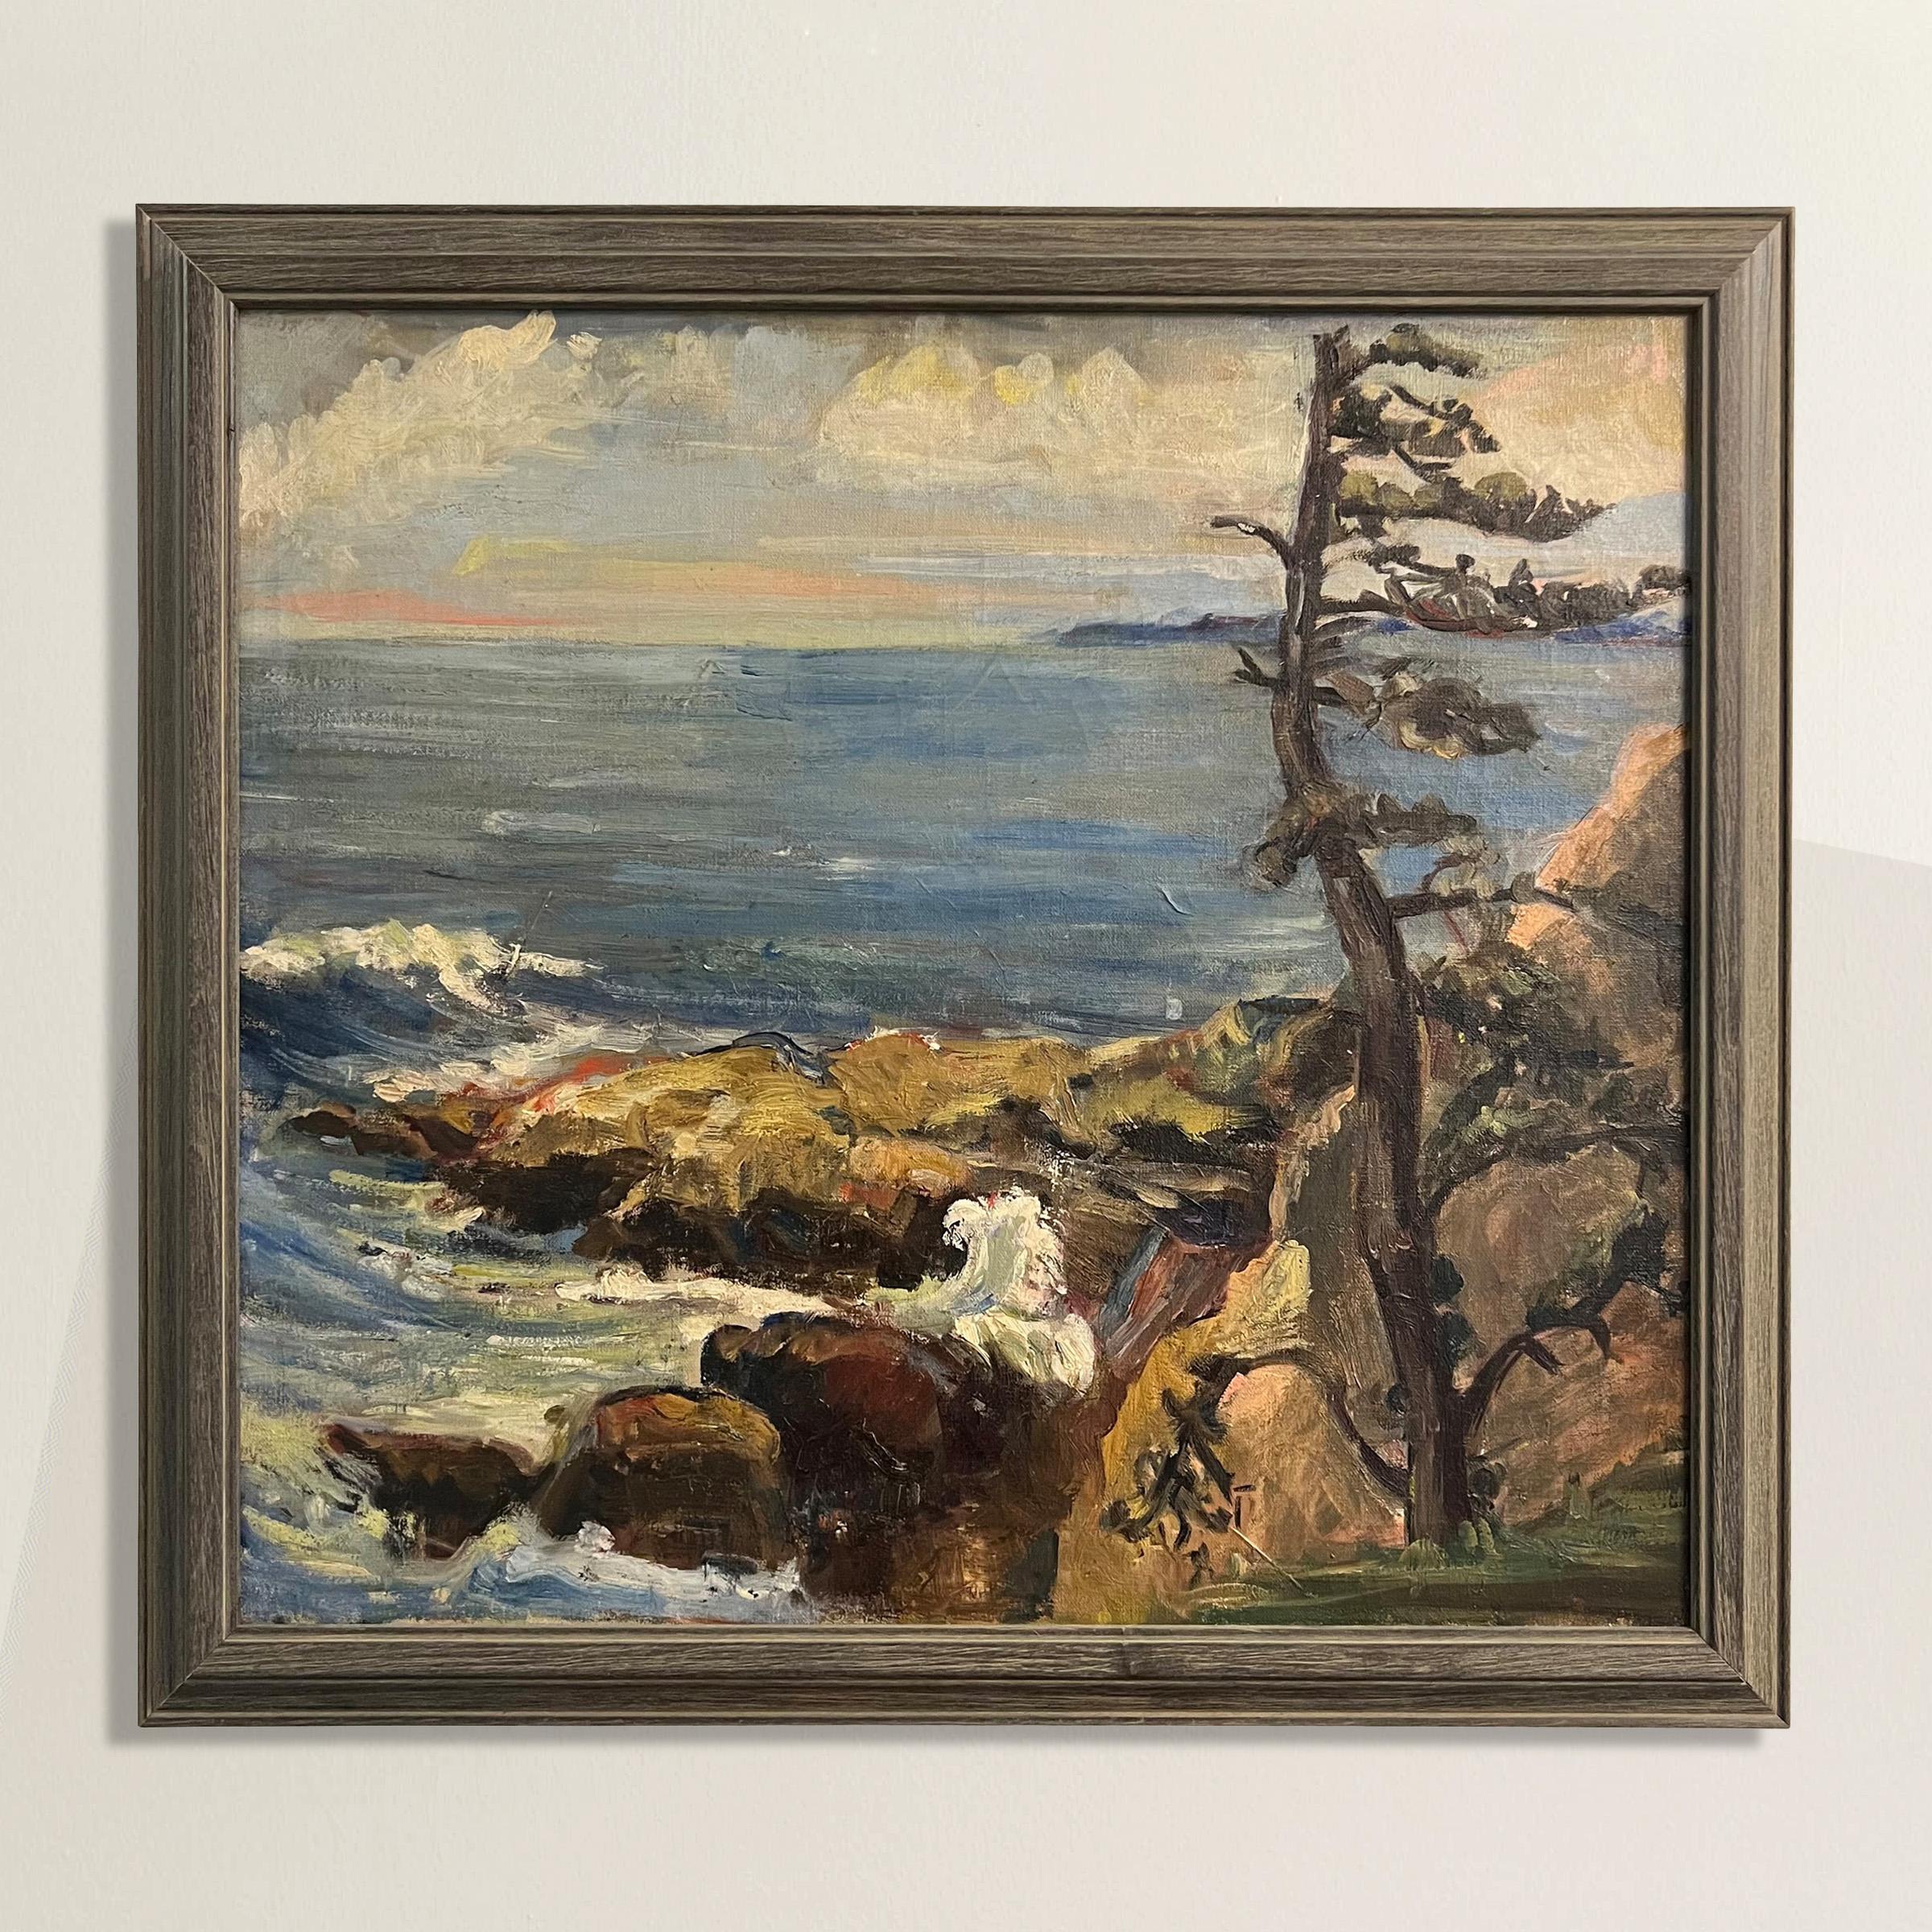 Immerse yourself in the raw beauty of nature with this striking 20th century American plein air oil painting. The tumultuous ocean cliff-side landscape takes center stage, portraying the untamed power of the sea. In the foreground, a contorted pine